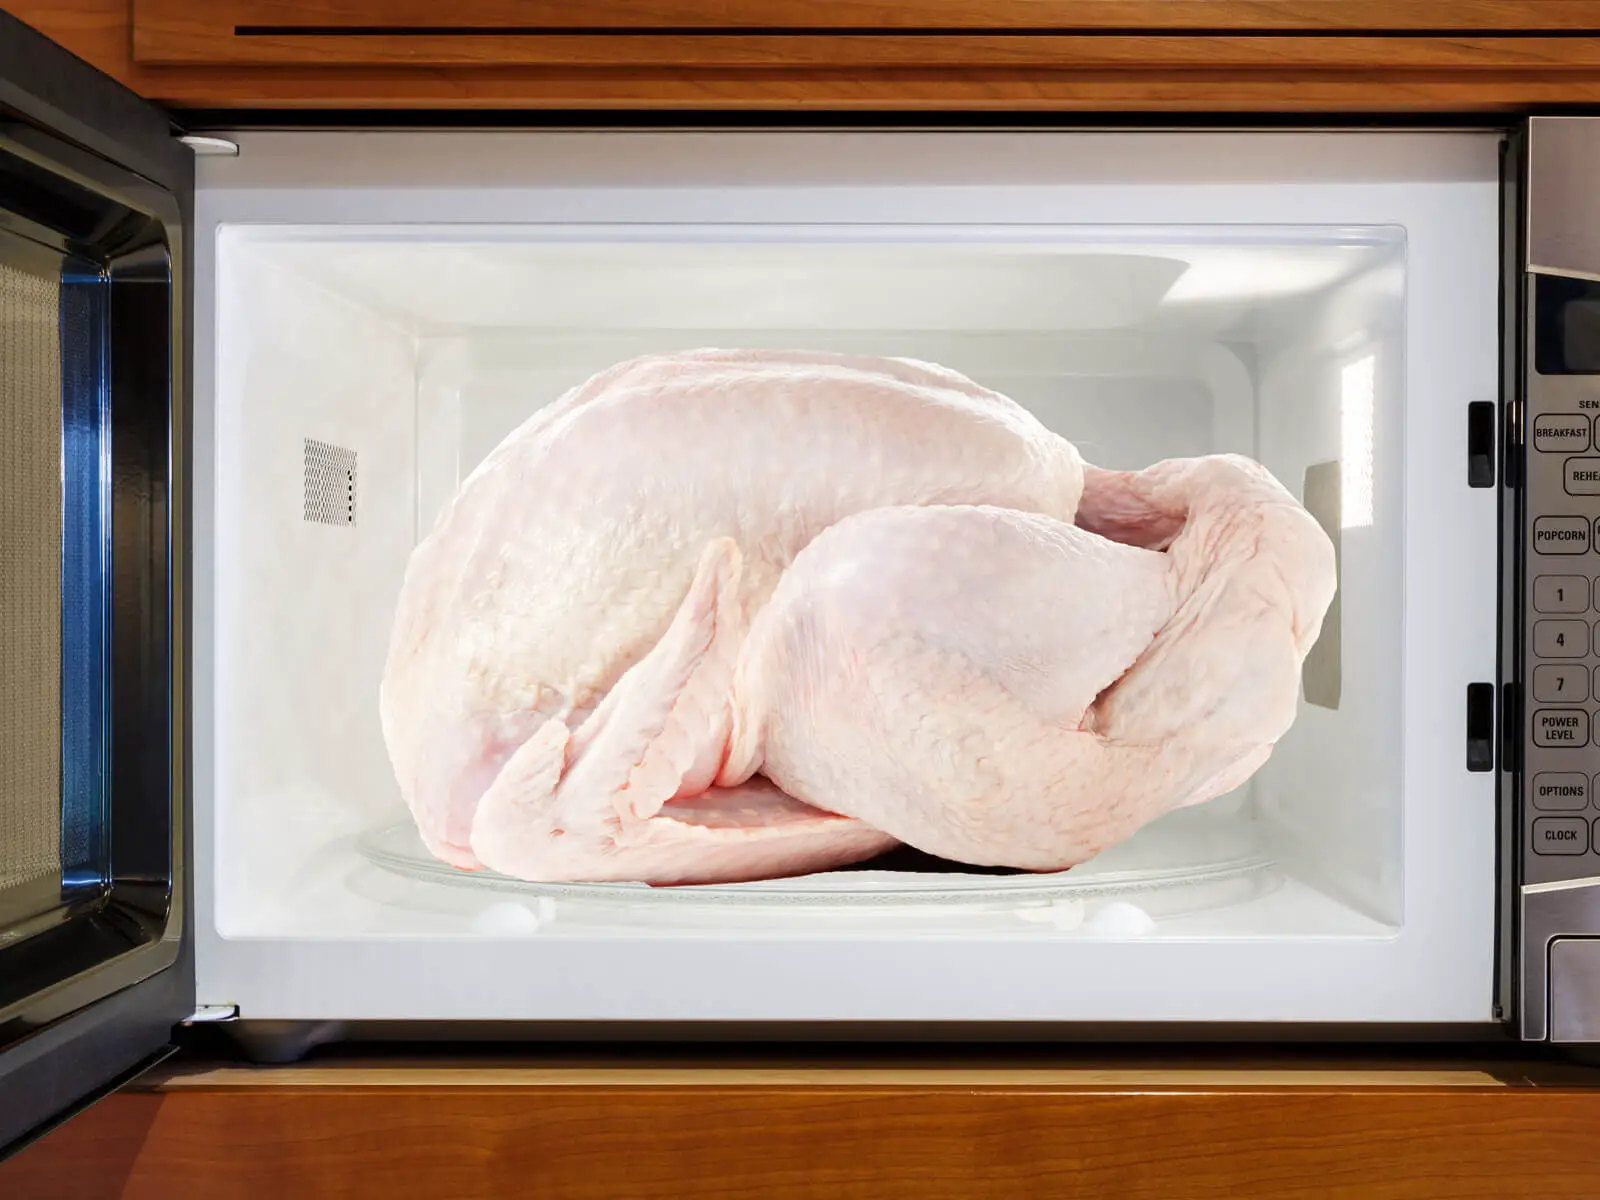 How to Defrost Turkey in a Microwave